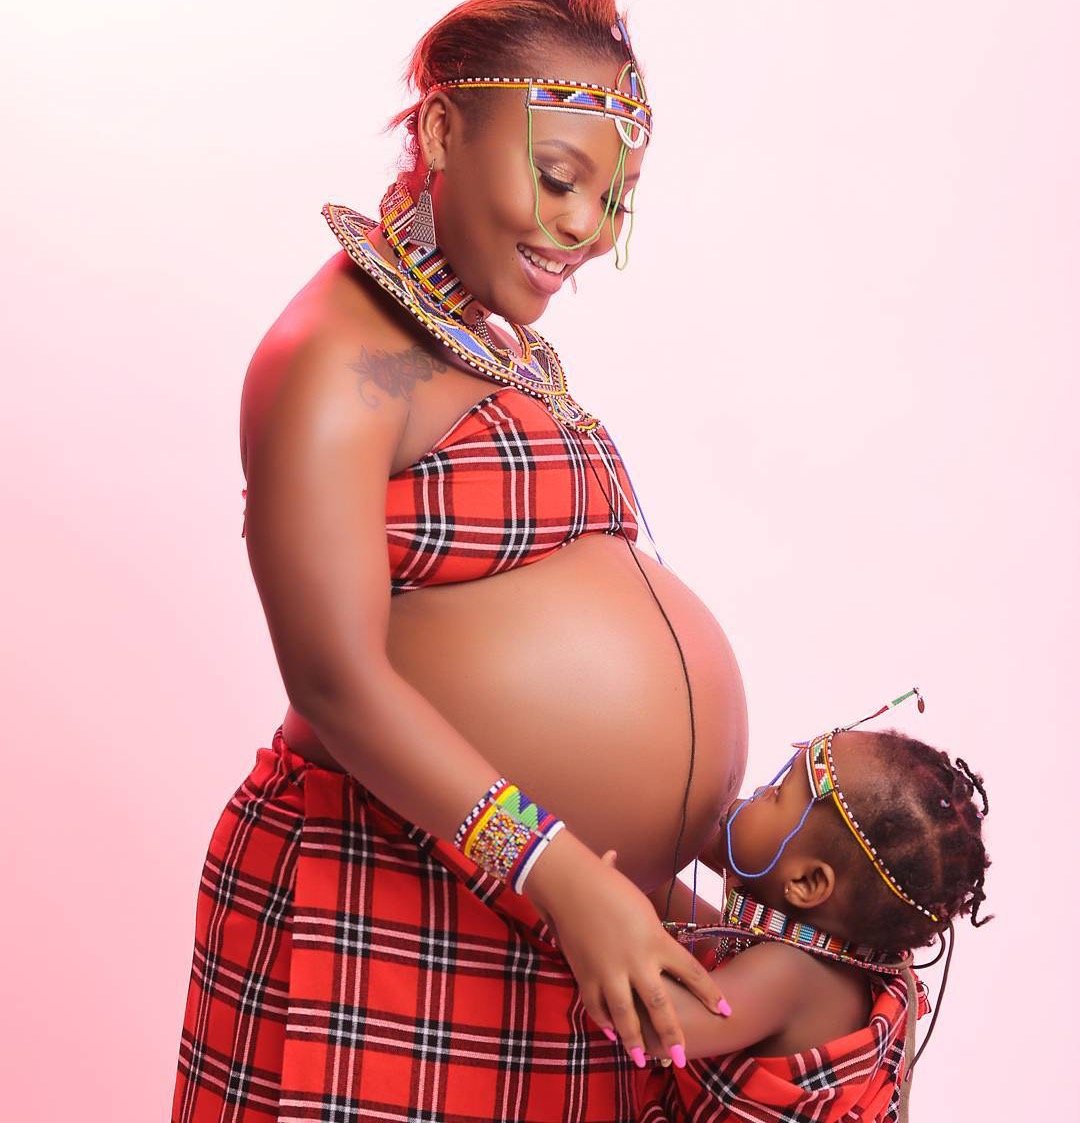 Actress Sofia from Machachari shares an adorable photo of her 2nd born daughter!